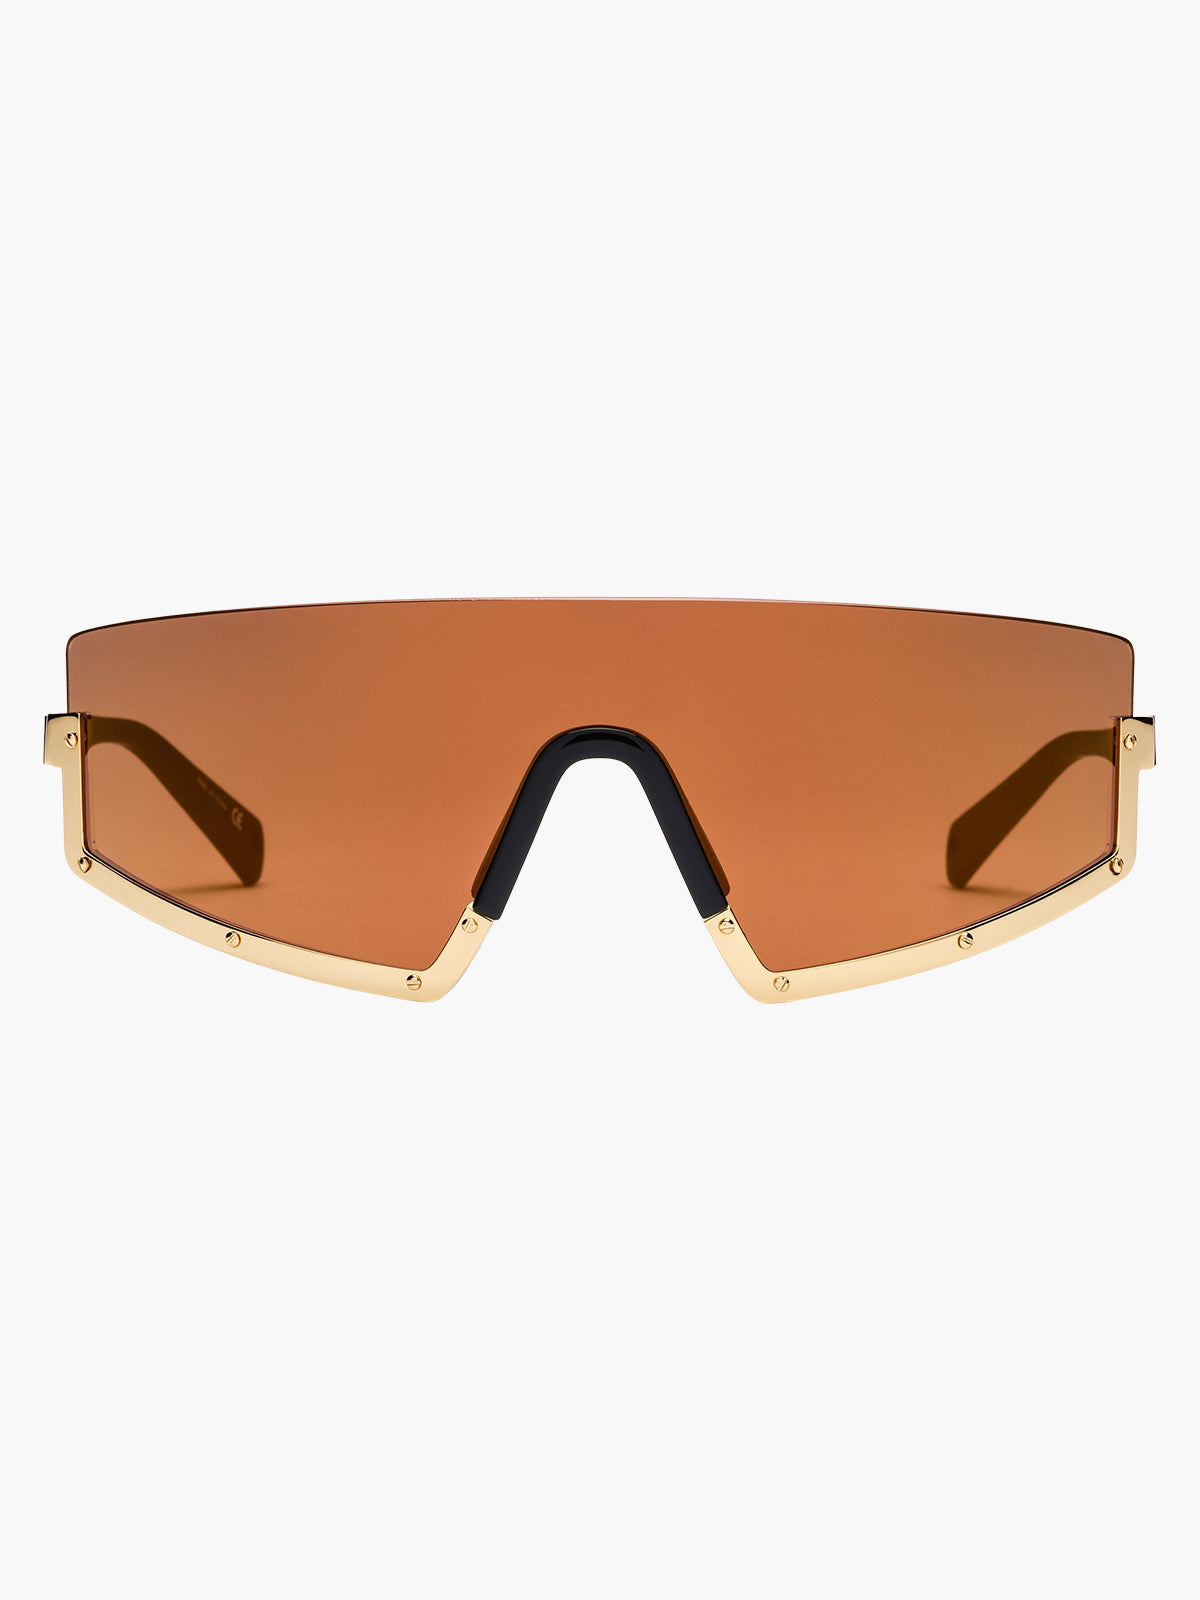 Stun 02 | Polished Gold/Muted Gold Mirror Lens